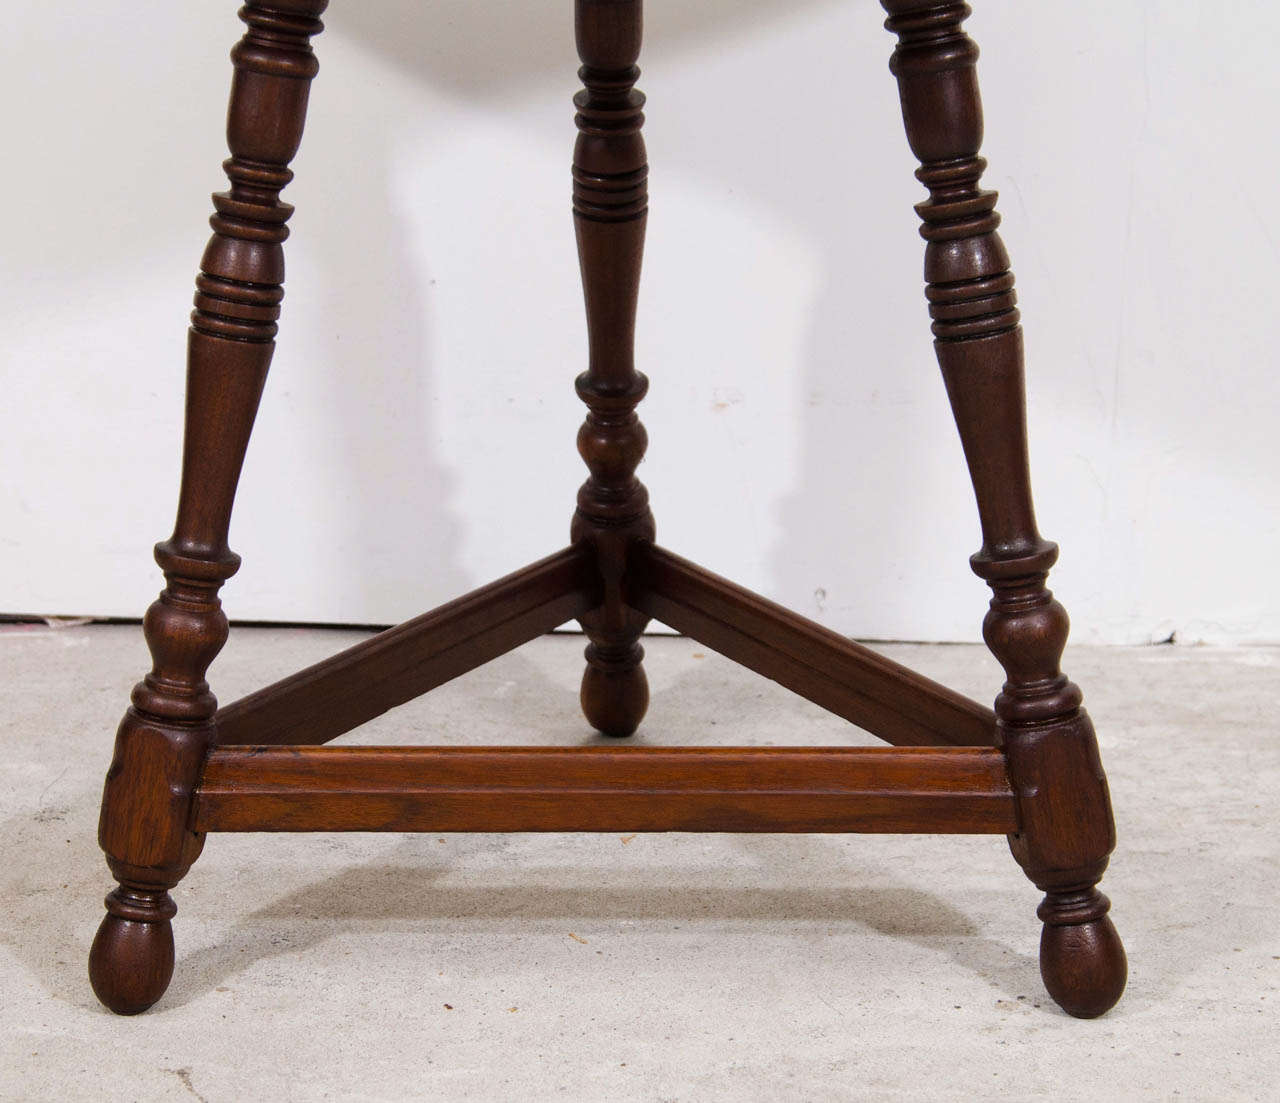 British Antique English Walnut Folding Top Cricket Table For Sale